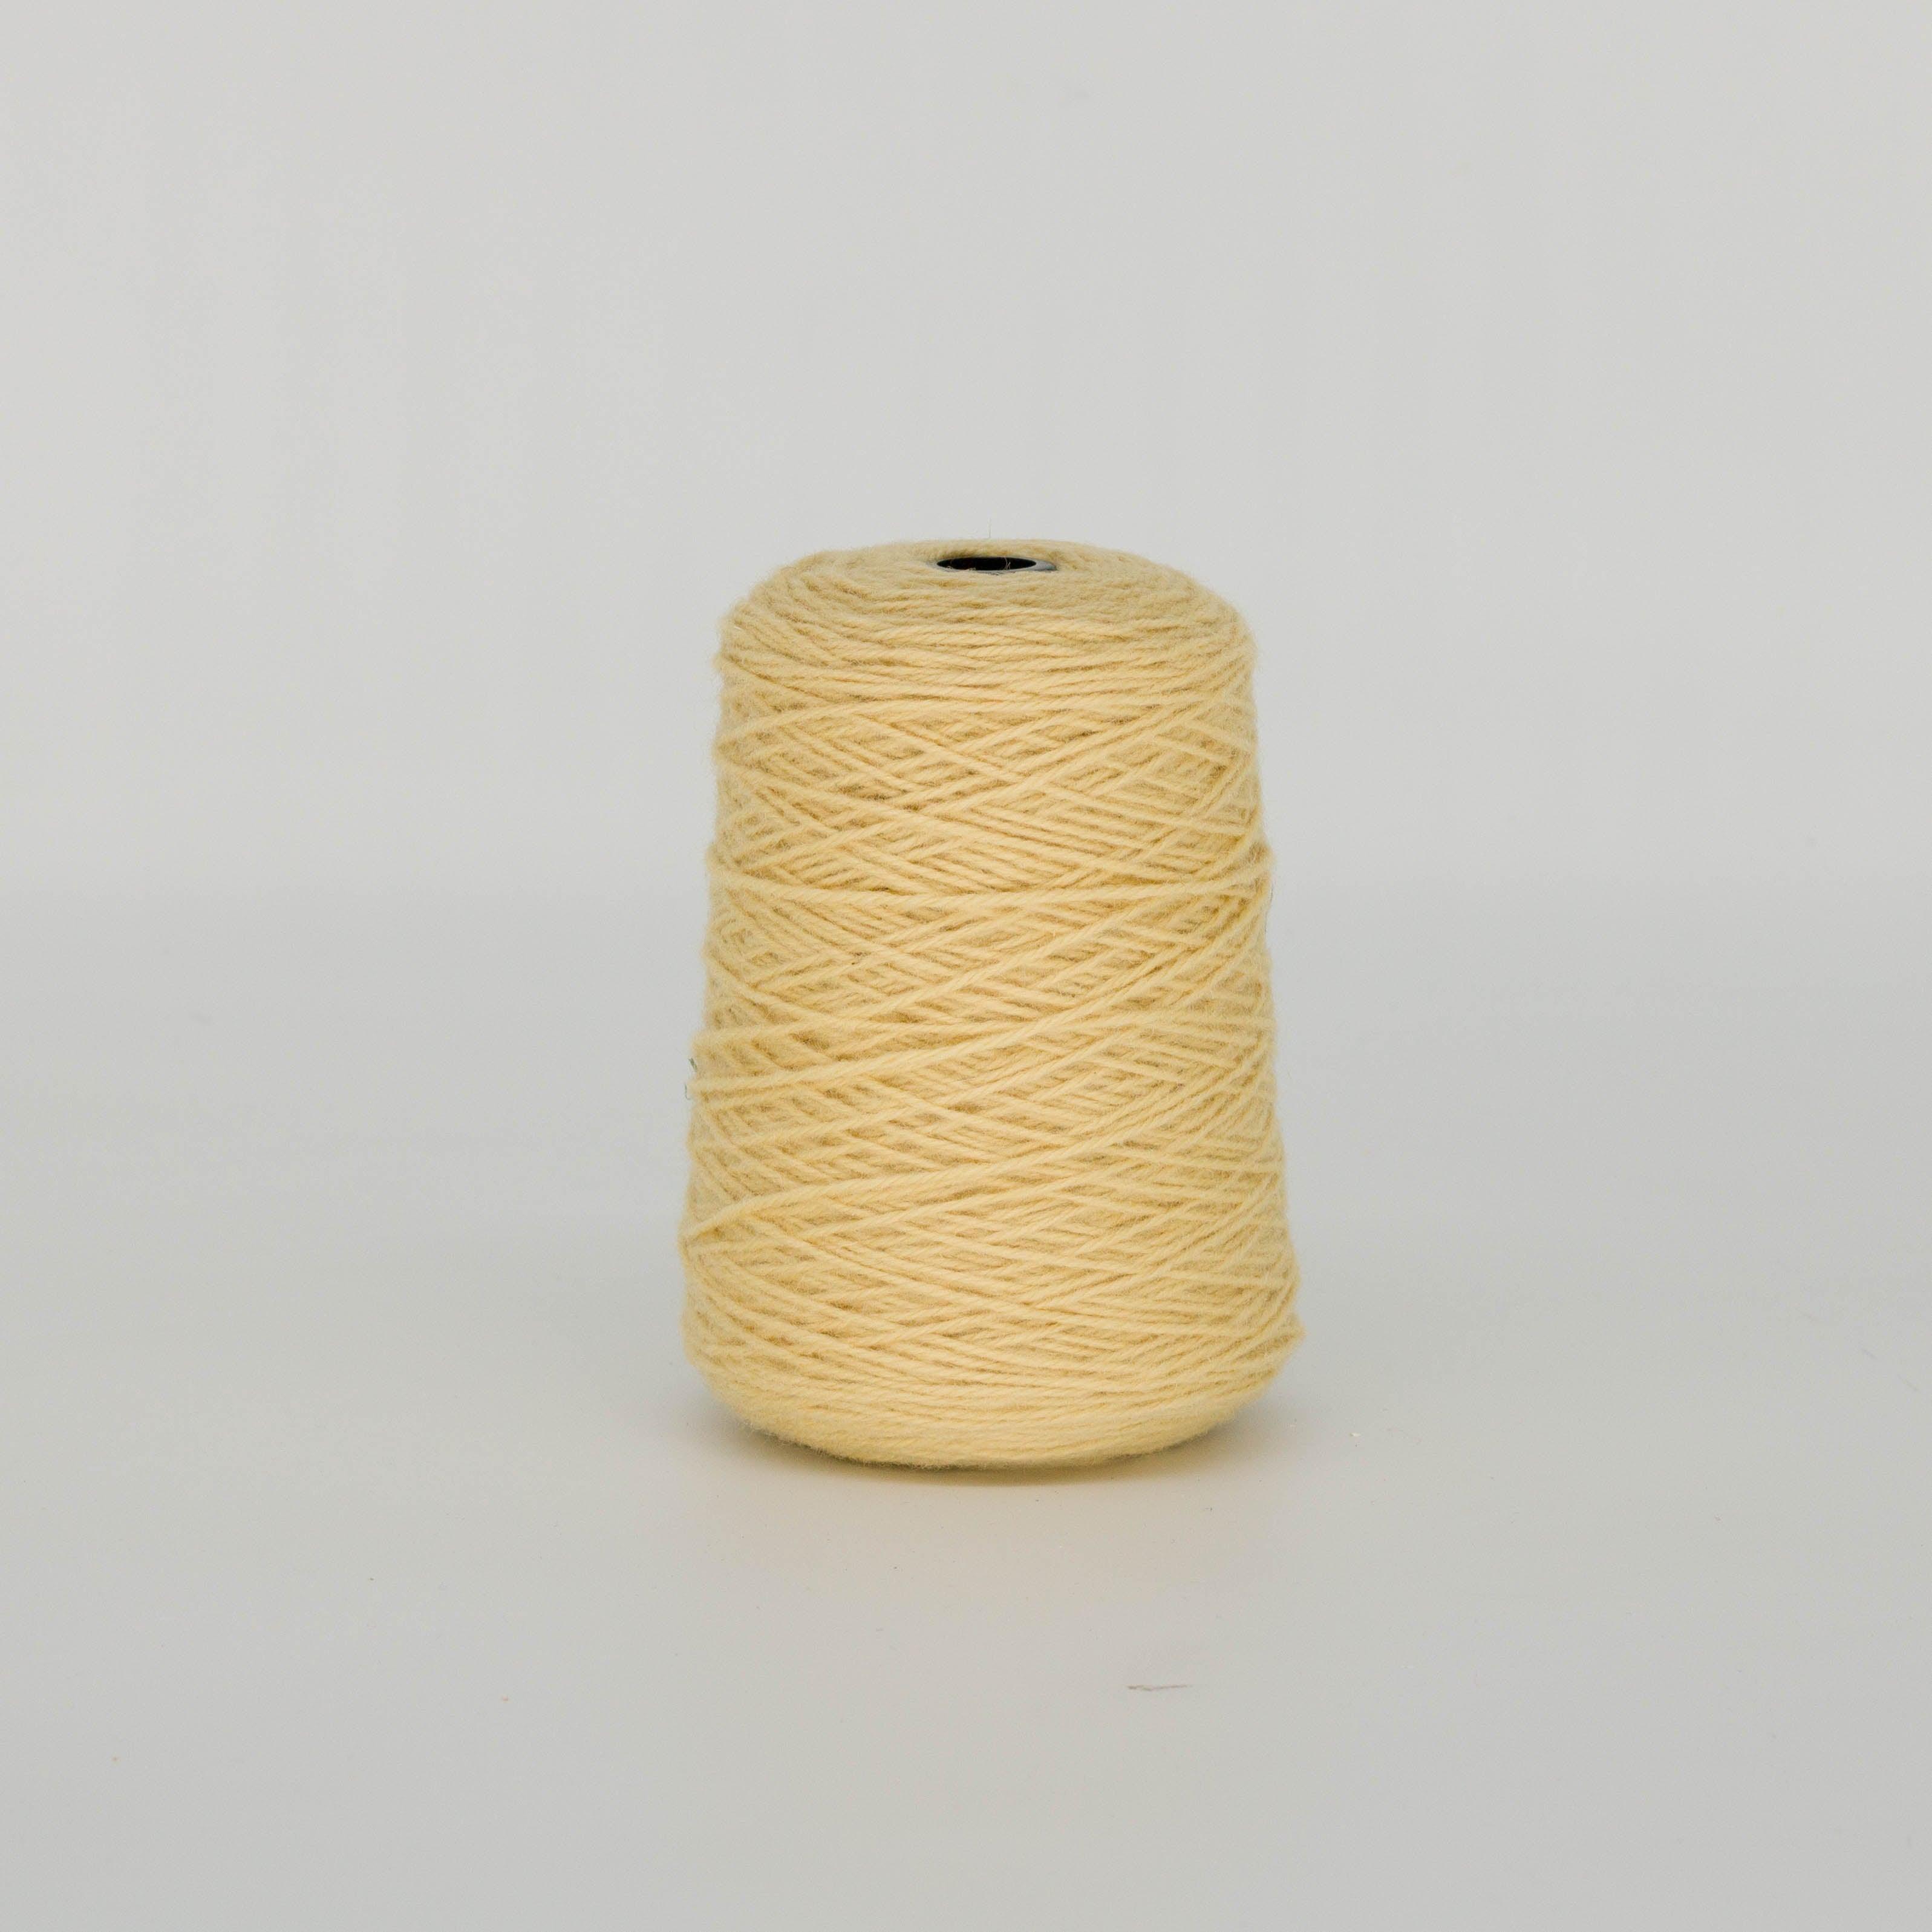 Light yellow / butter 100% Wool Rug Yarn On Cones (429) - Tuftingshop